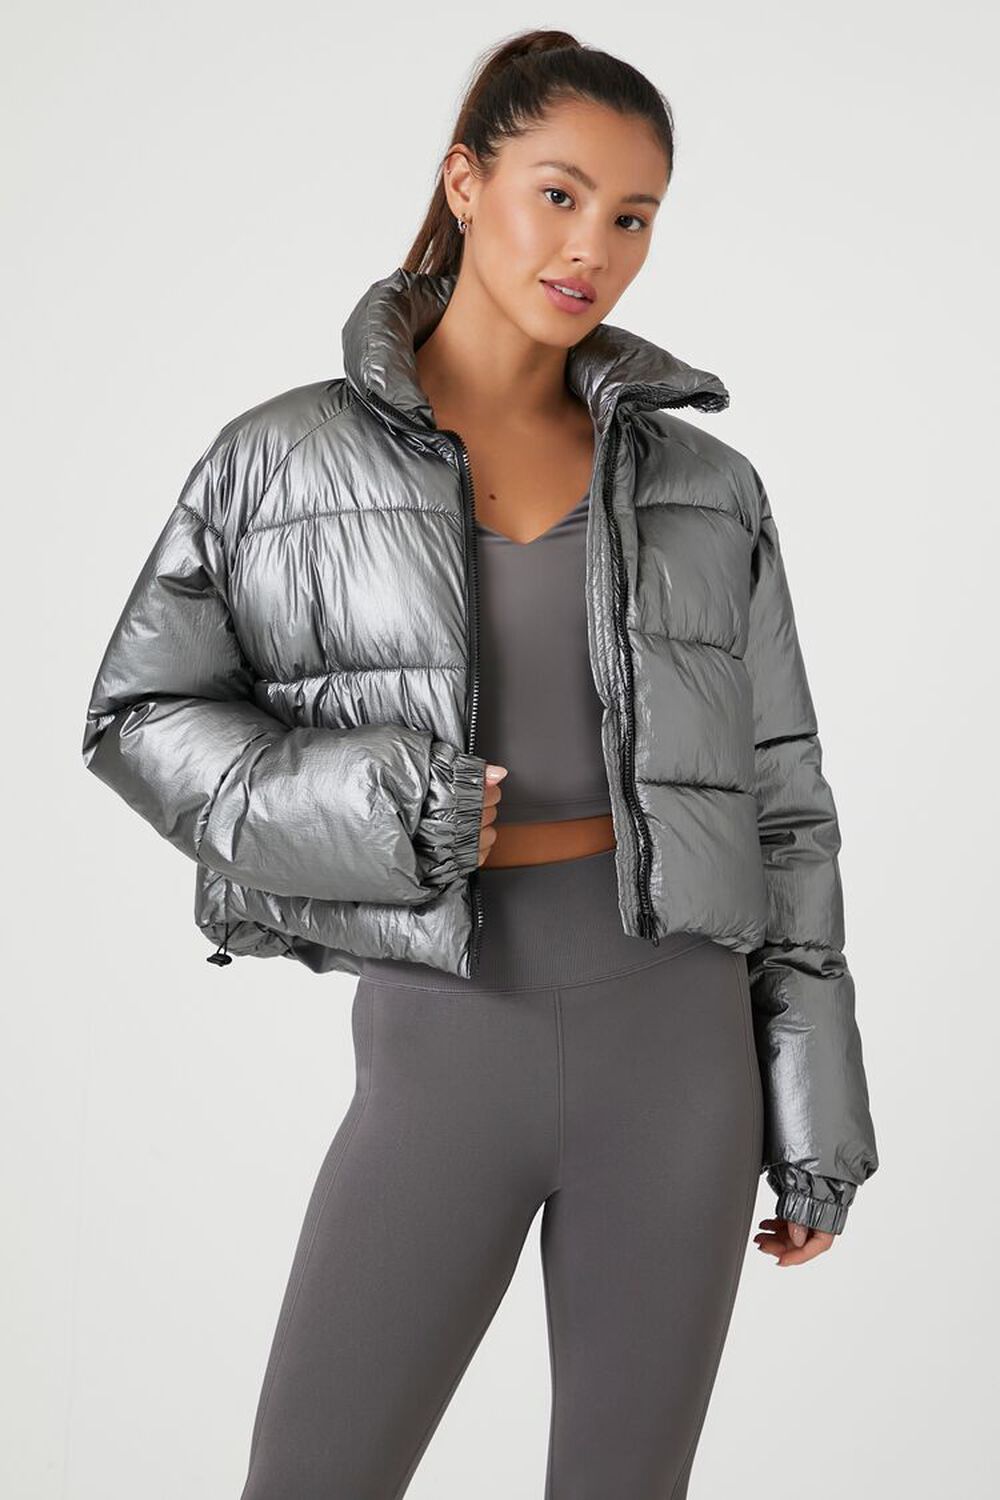 Forever 21 Women's Active Metallic Puffer Bubble Coat Jacket in Silver, Xs | Workout, Yoga, Gym Clothes | F21